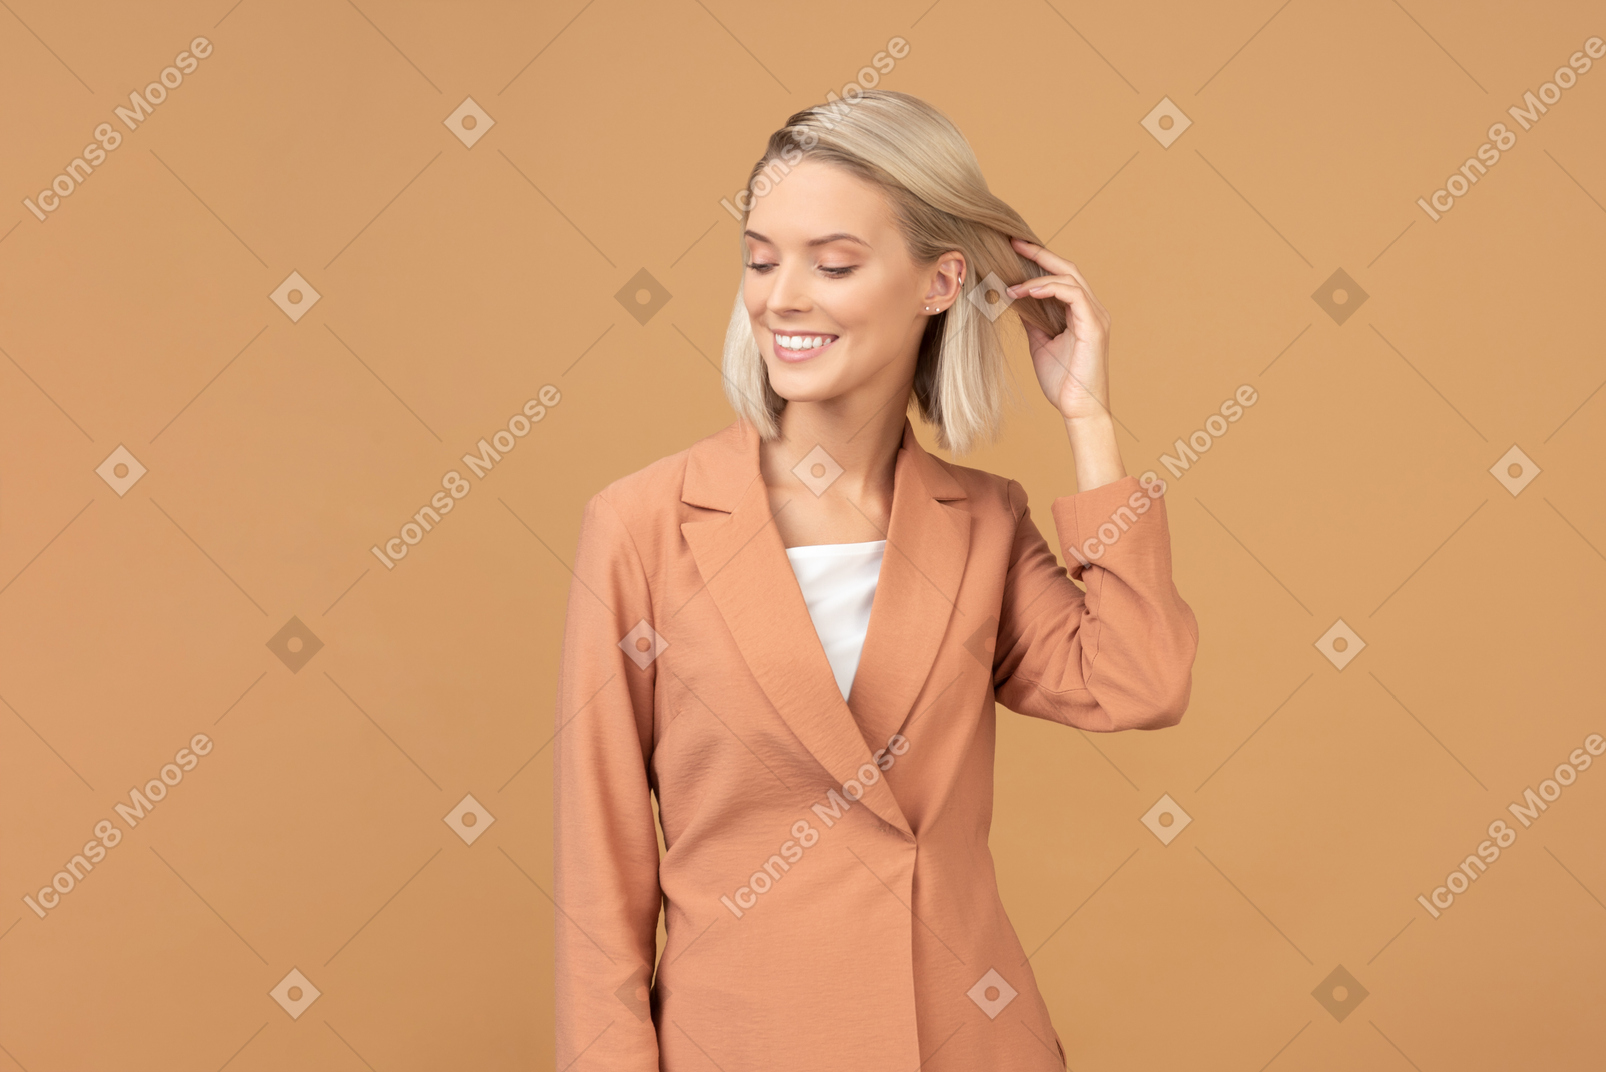 Happy young woman in terracotta jacket